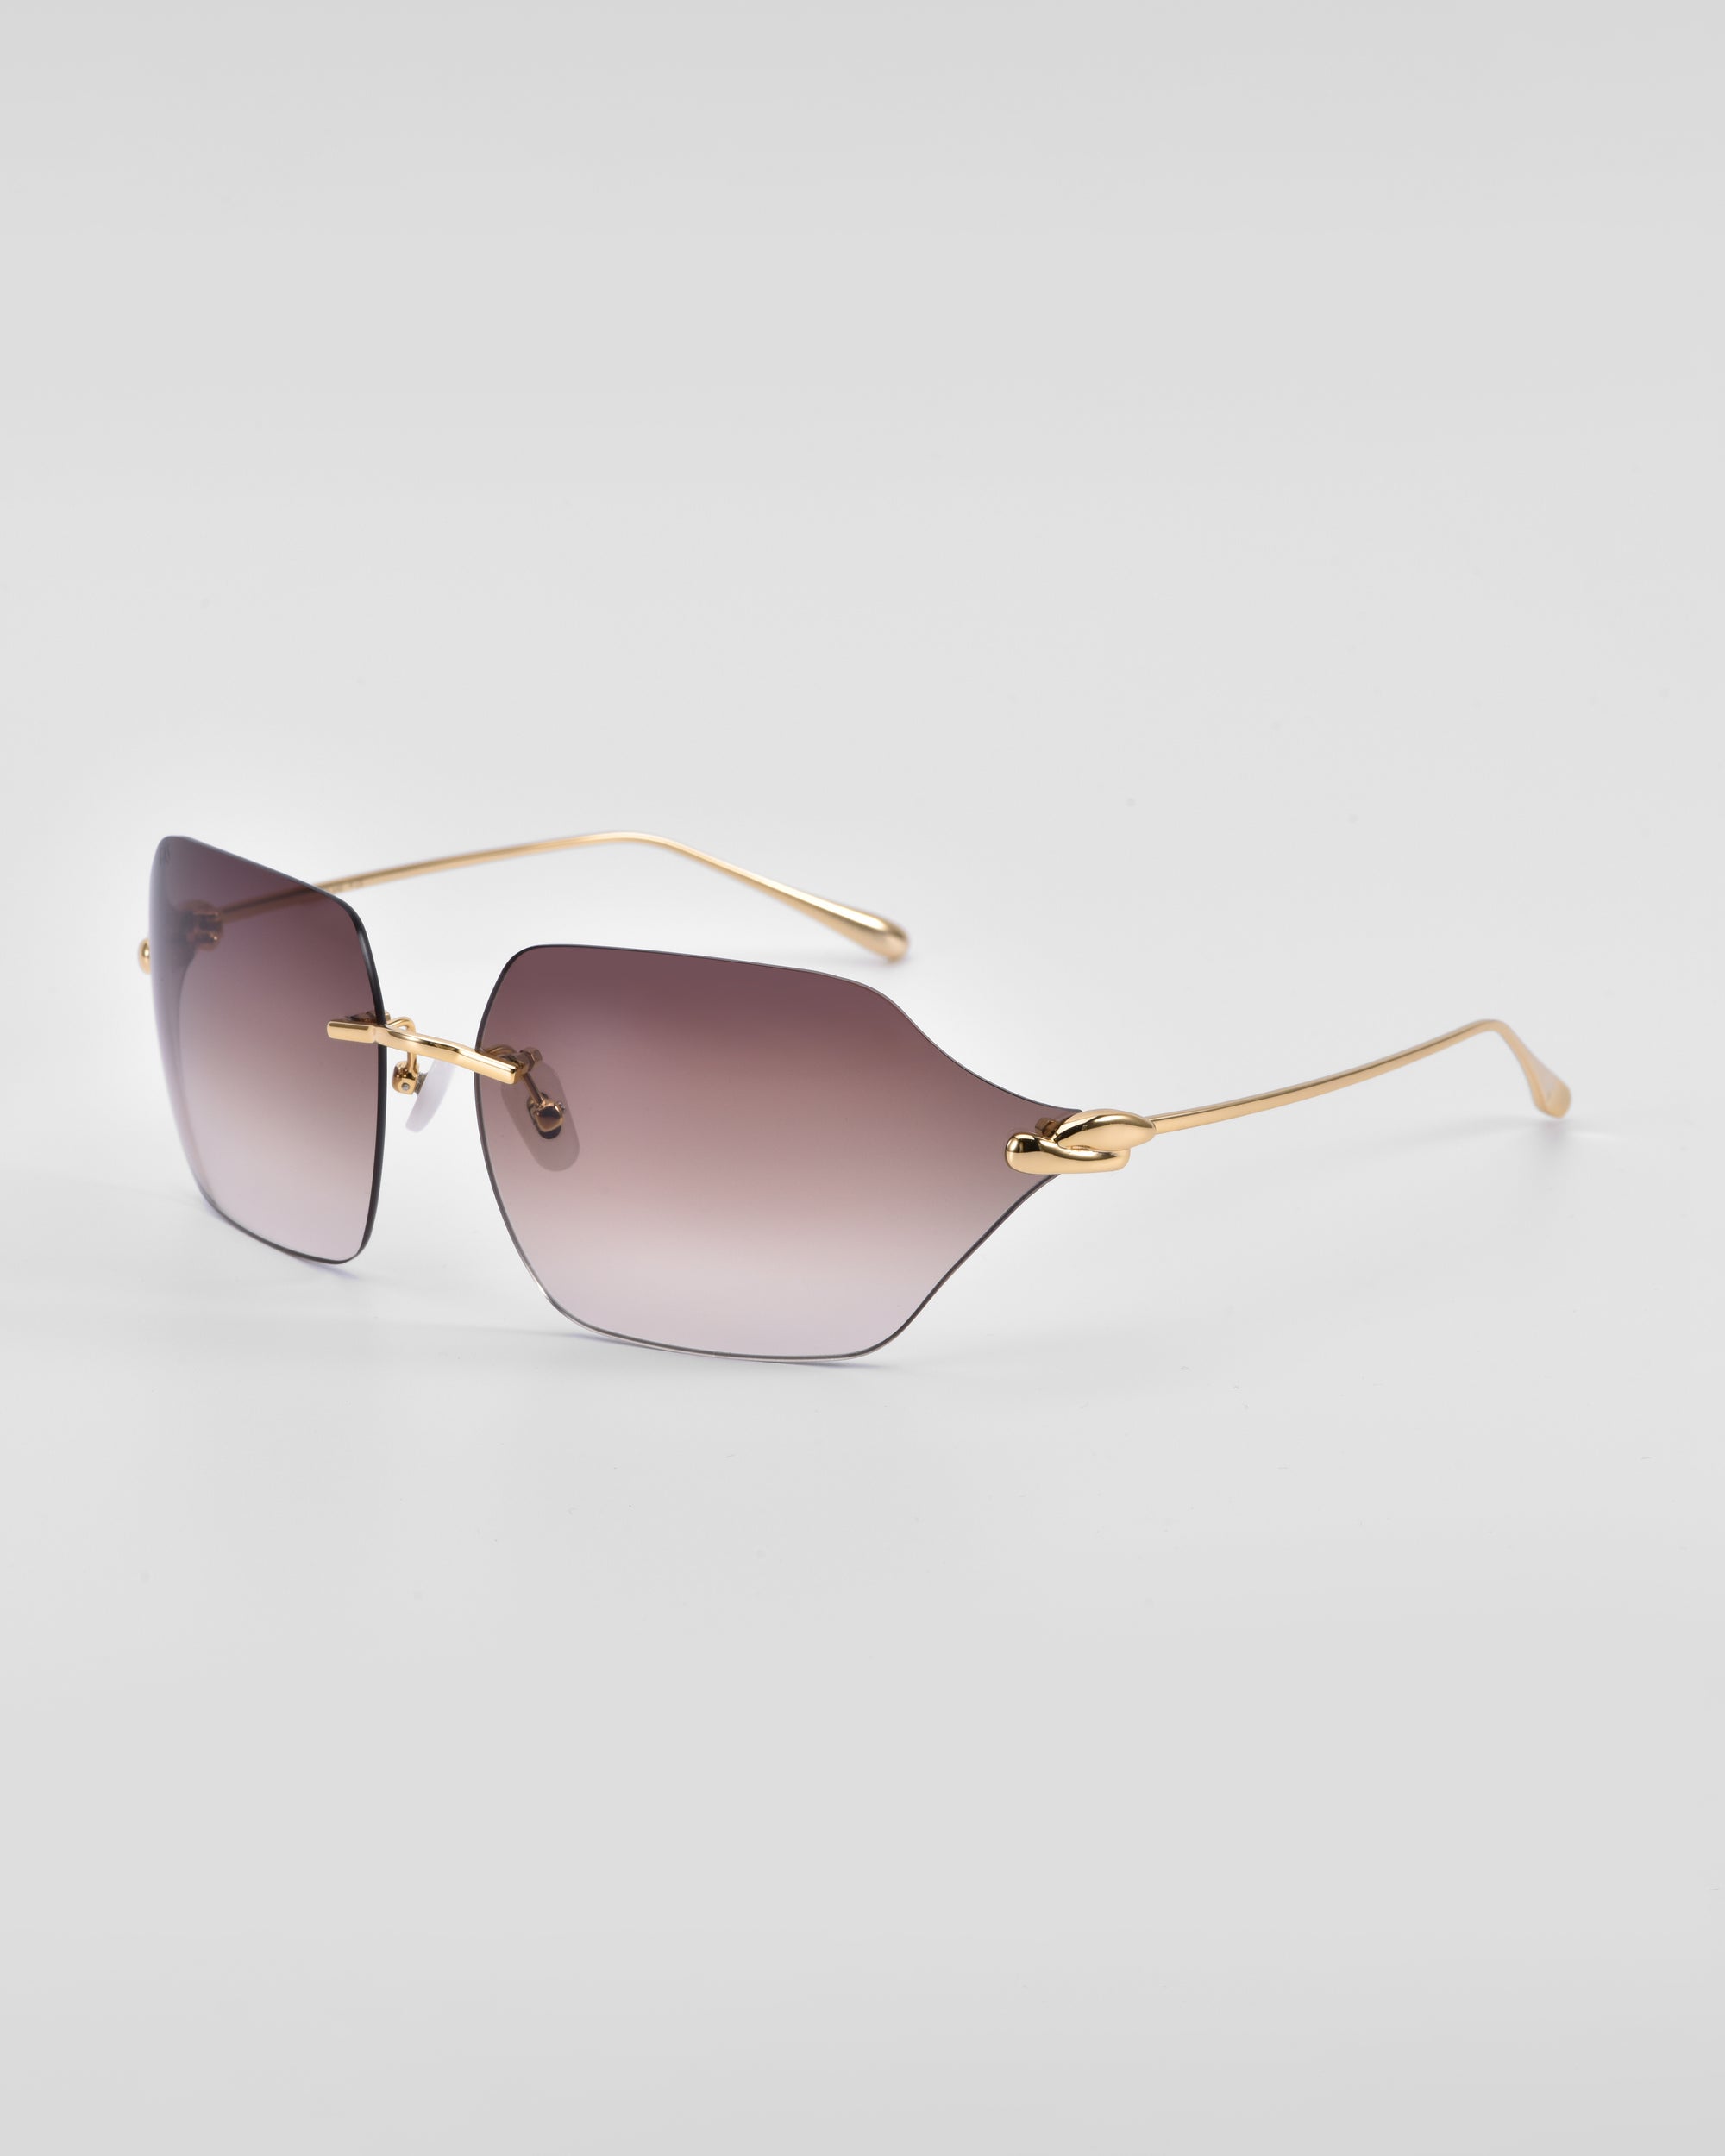 A pair of fashionable For Art&#39;s Sake® Serpent II sunglasses with gradient lenses from dark to light gray, featuring a frameless wrap lens design and thin, metallic 18-karat gold-plated temples and bridge. The temples have a slight curve, and the overall design is sleek and modern.